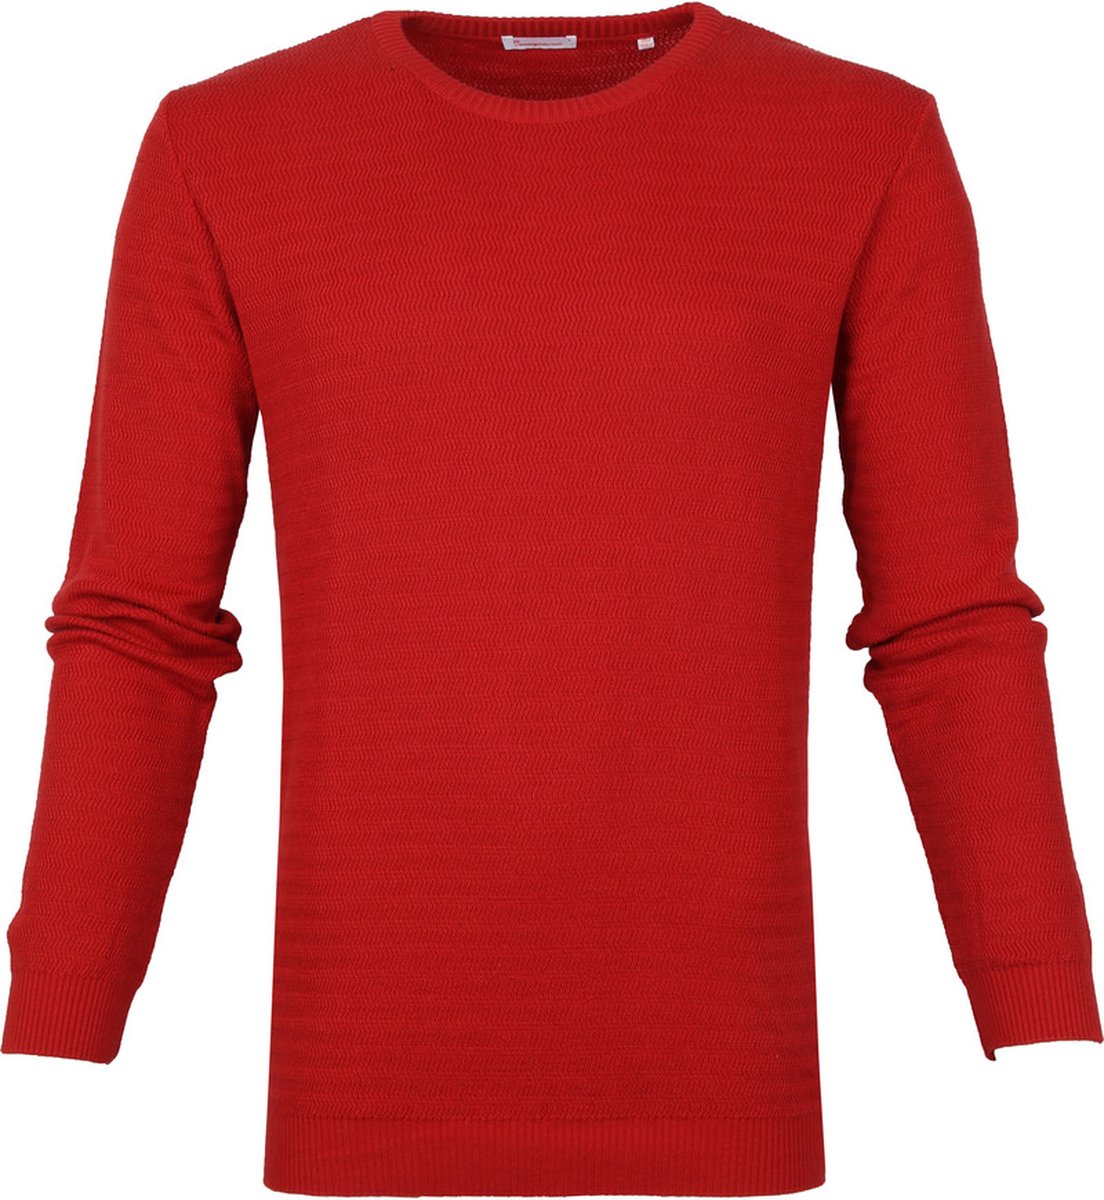 KnowledgeCotton Apparel - Trui Waves Rood - Maat M - Modern-fit